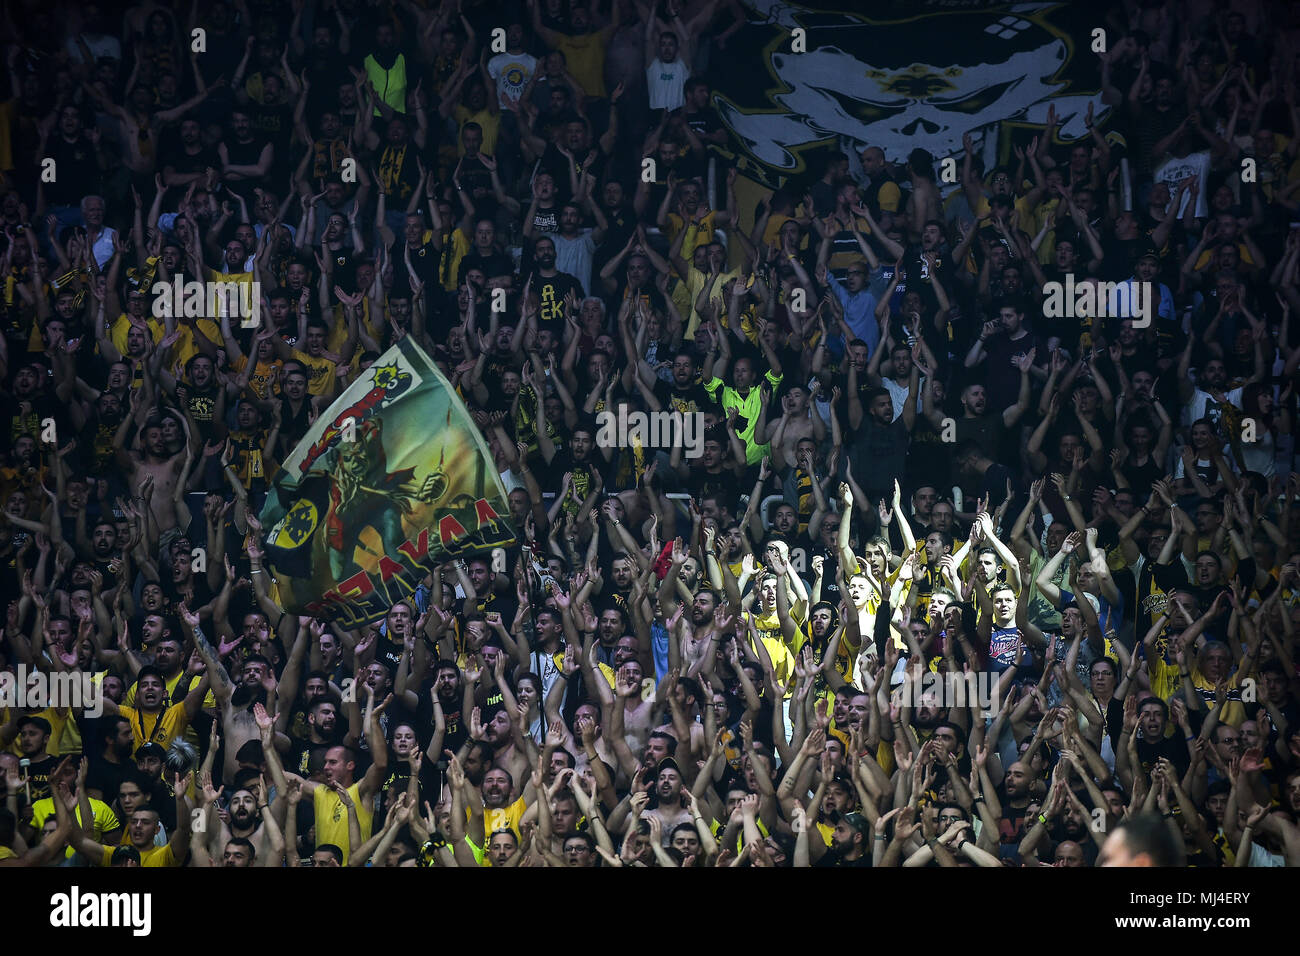 Aek Athens High Resolution Stock Photography and Images - Alamy